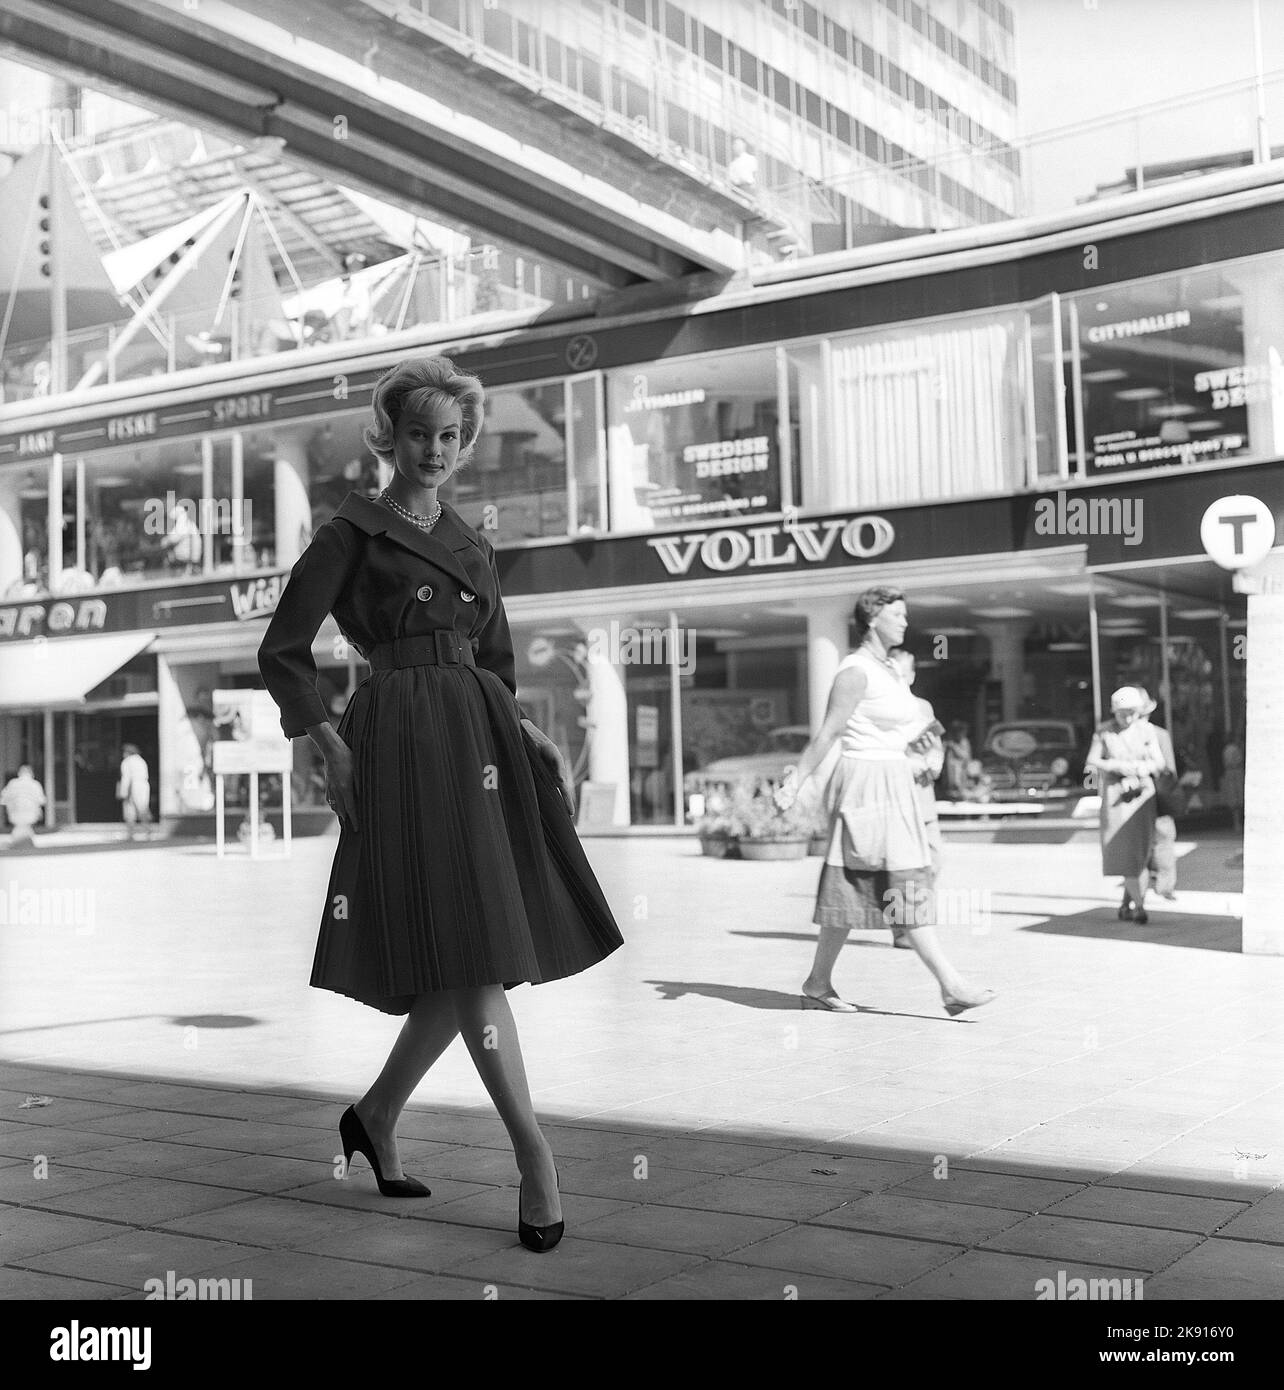 In the 1950s. A woman modelling a 1950s outfit with a jacket and skirt in matching dark. In the background a street in central Stockholm and a Volvo shop where the models Amazon and PV are on display. Sweden 1959 Kristoffersson ref CH21-9 Stock Photo